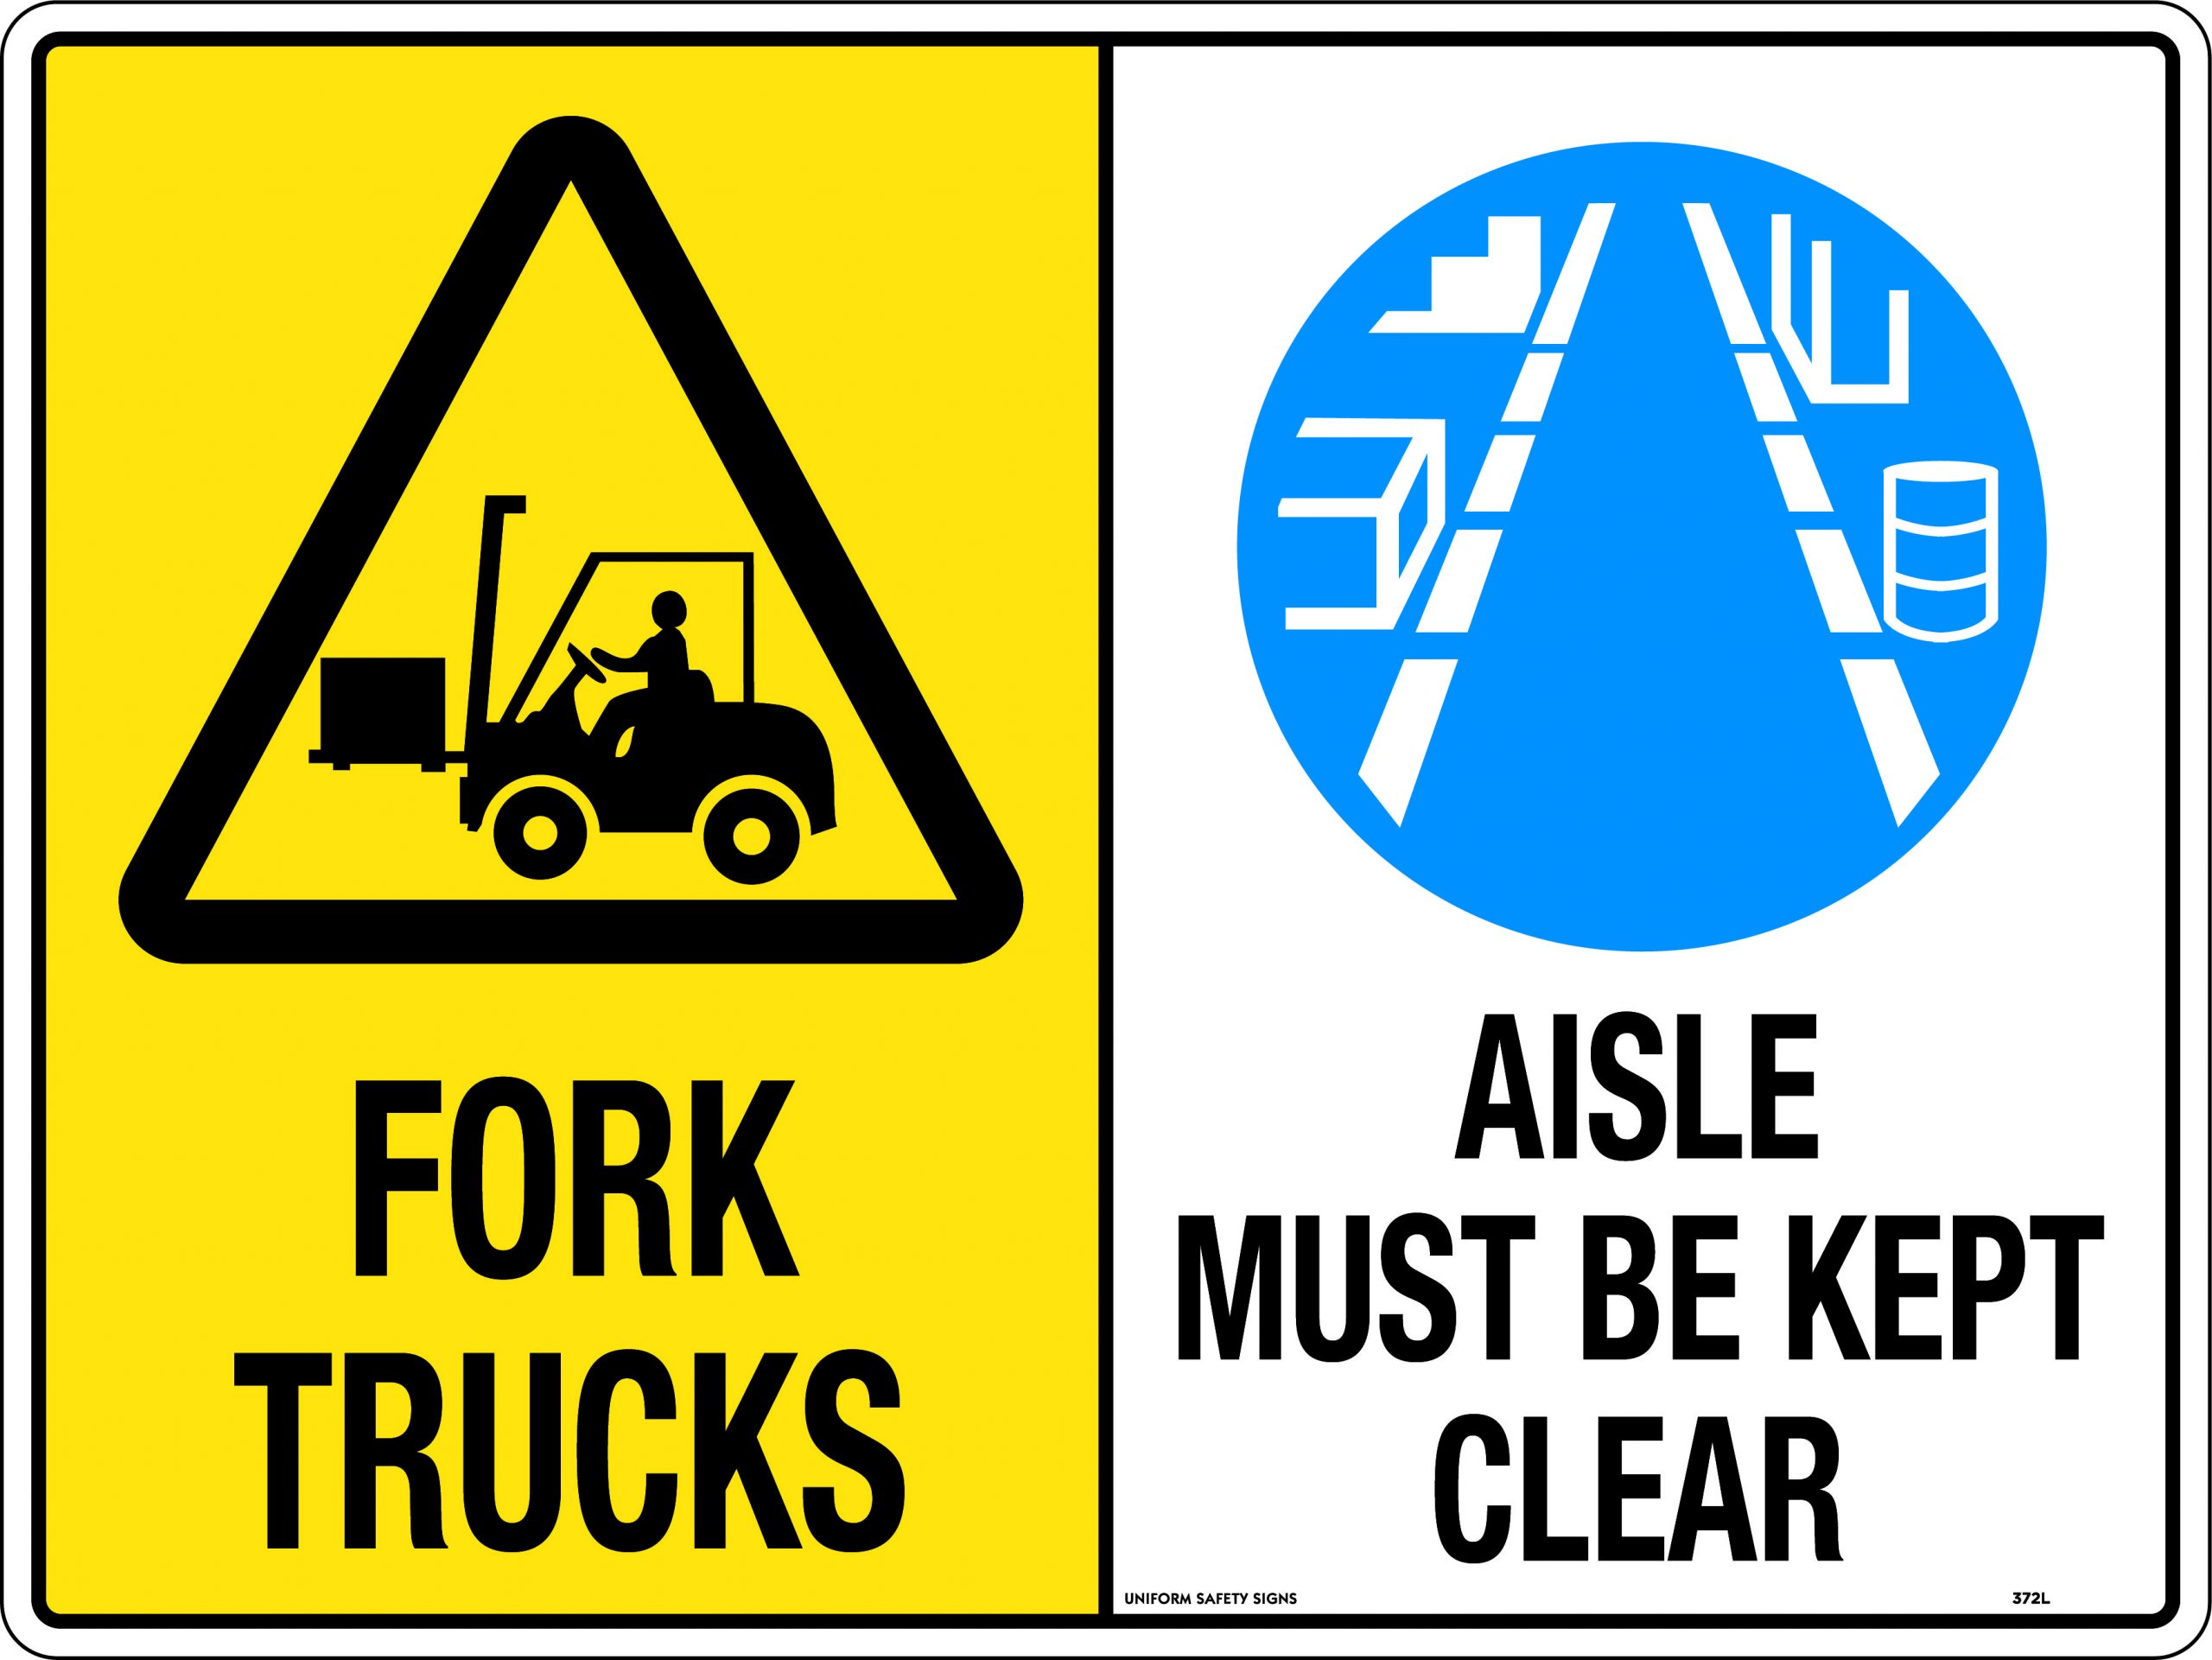 UNIFORM SAFETY 450X300MM METAL MULTI SIGN FORK TRUCKS / AISLE MUST BE